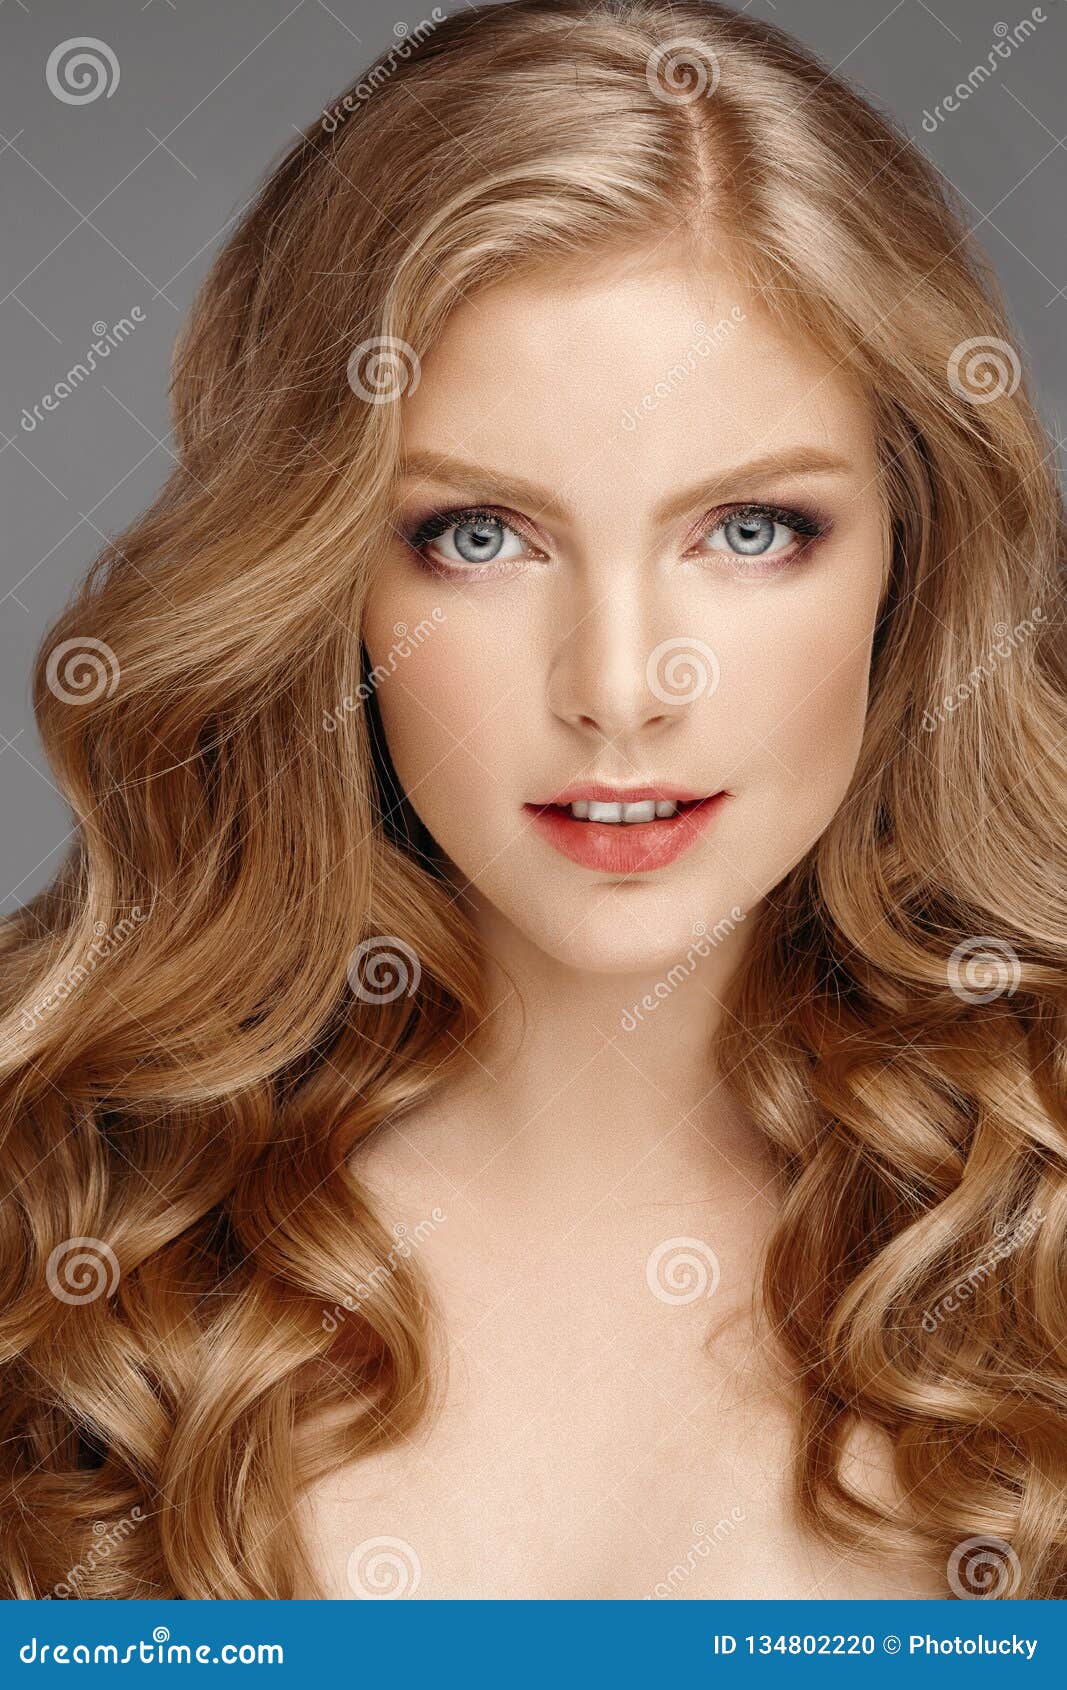 Stunning Natural Beauty with Blonde Wavy Hair. Stock Photo - Image of face,  salon: 134802220